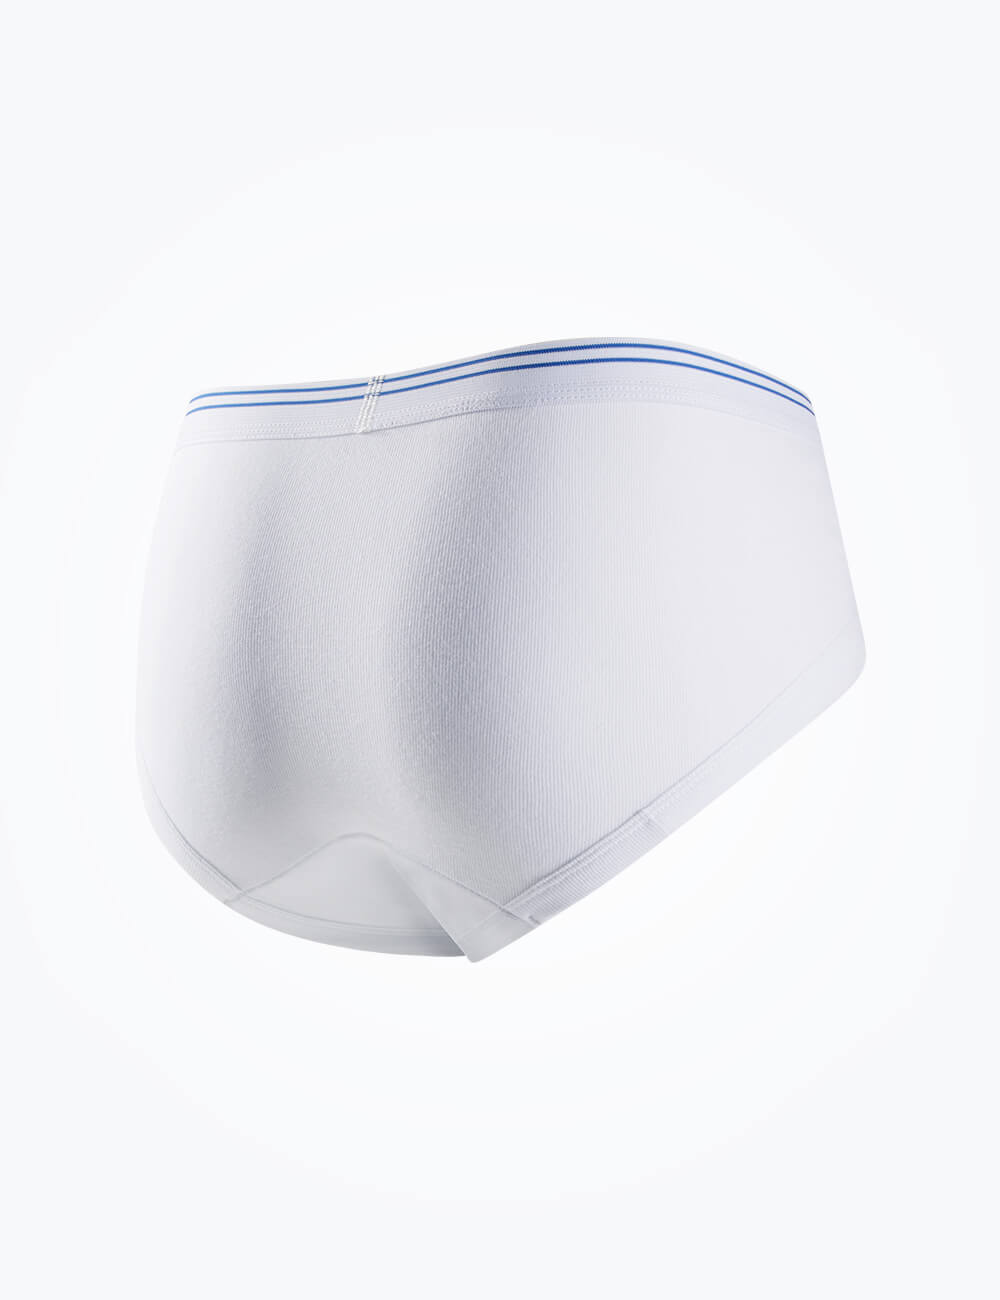 Men's Resuable Waterproof Briefs with Fly for Moderate